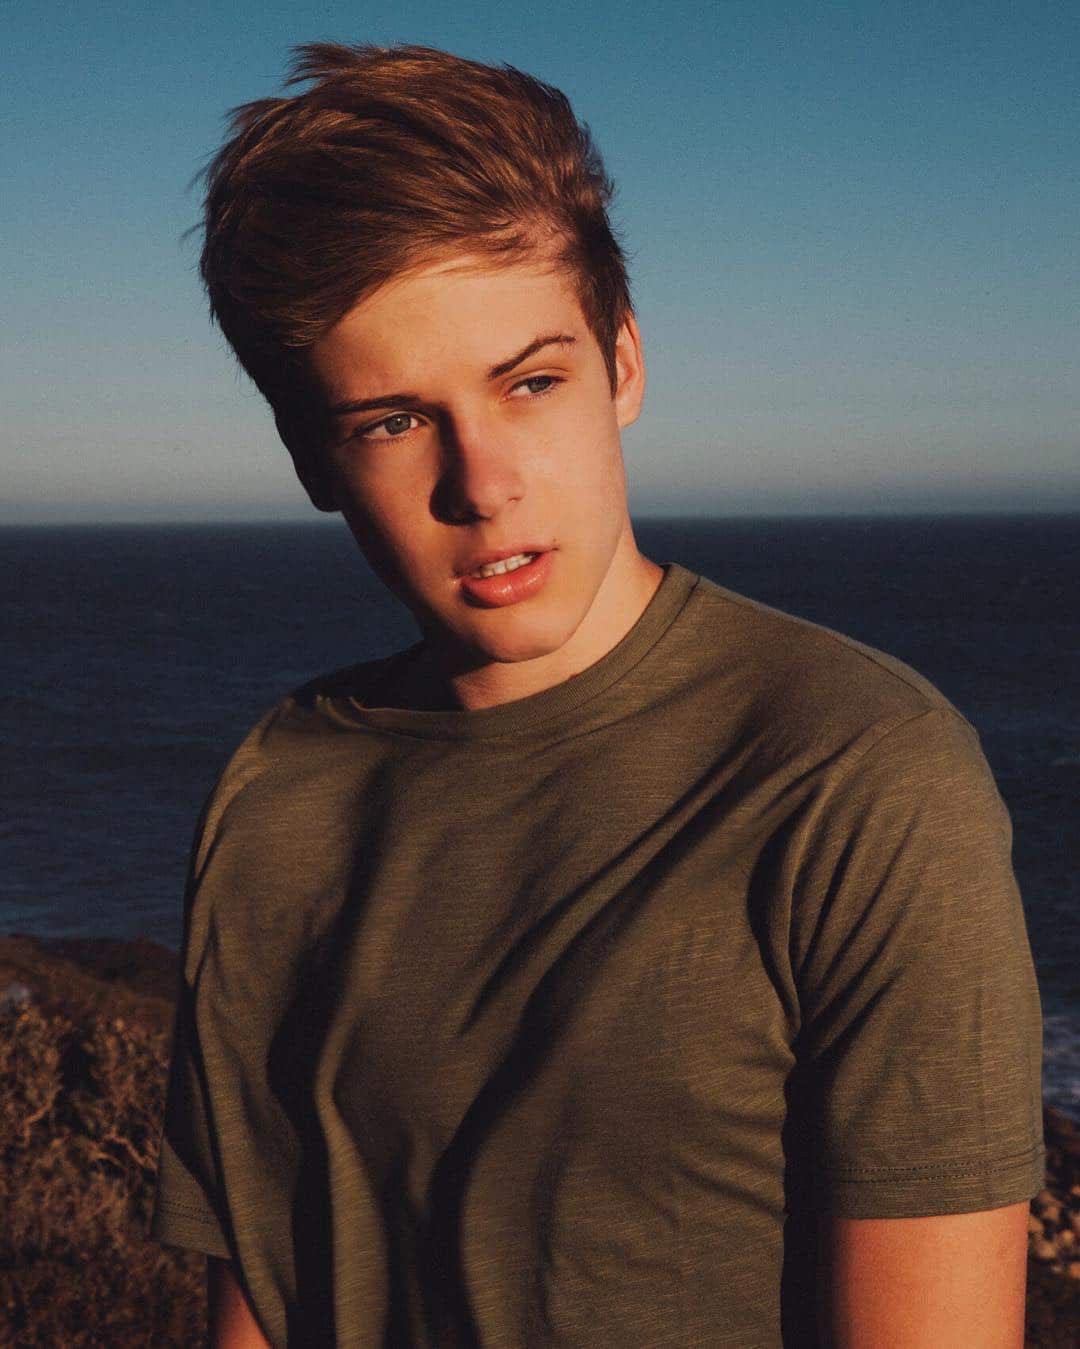  Blake Gray - Biography, Profile, Facts, and Career